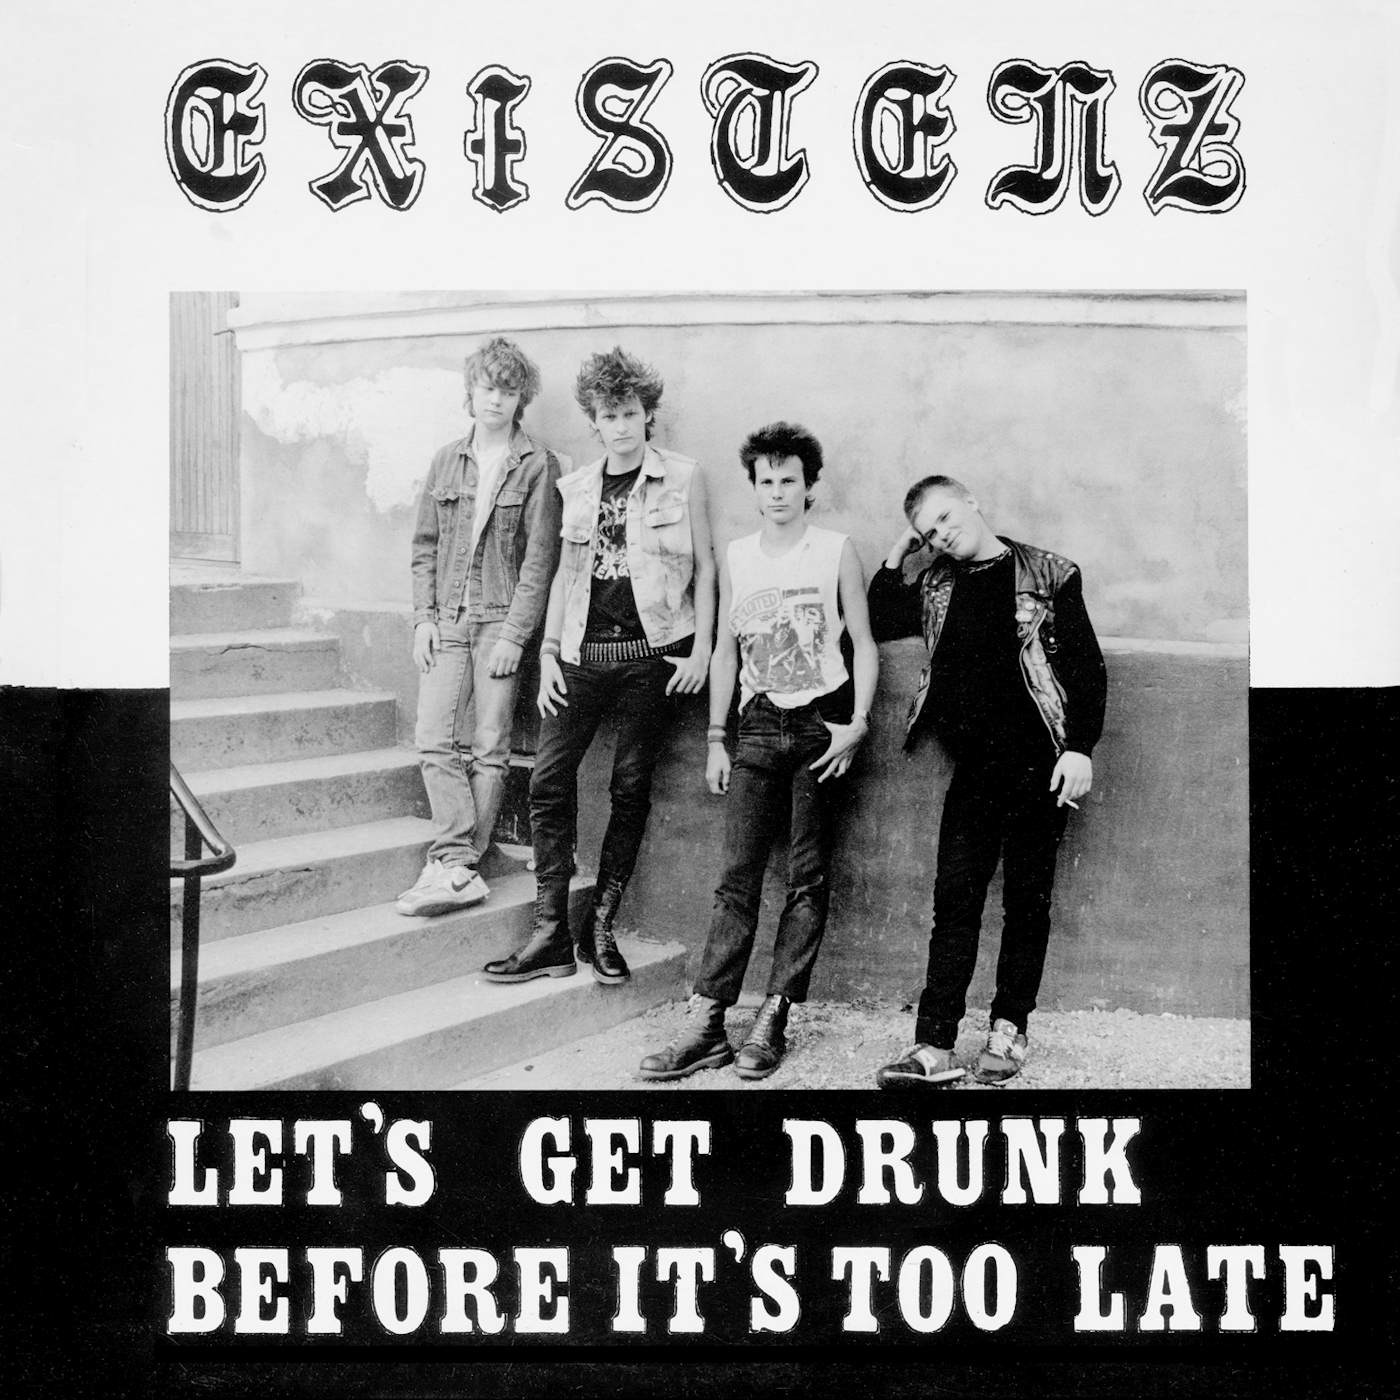 Existenz Let's Get Drunk Before It's Too Late Vinyl Record